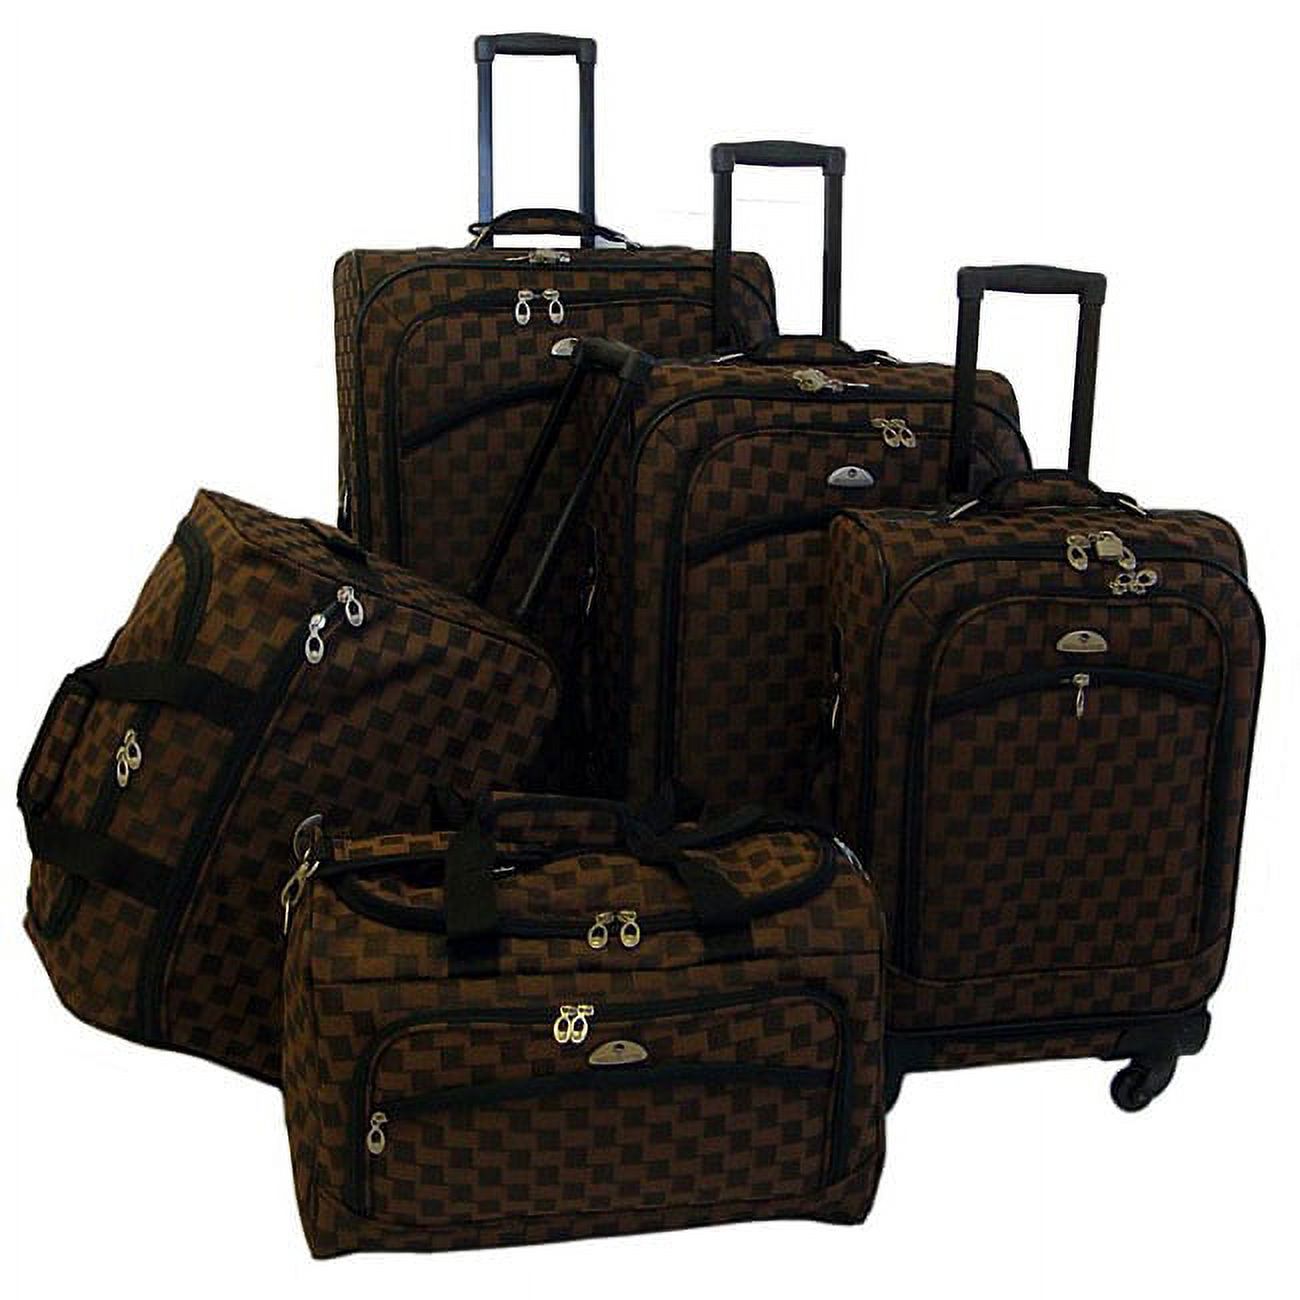 American Flyer Madrid 5-Piece Spinner Luggage Set - image 2 of 4